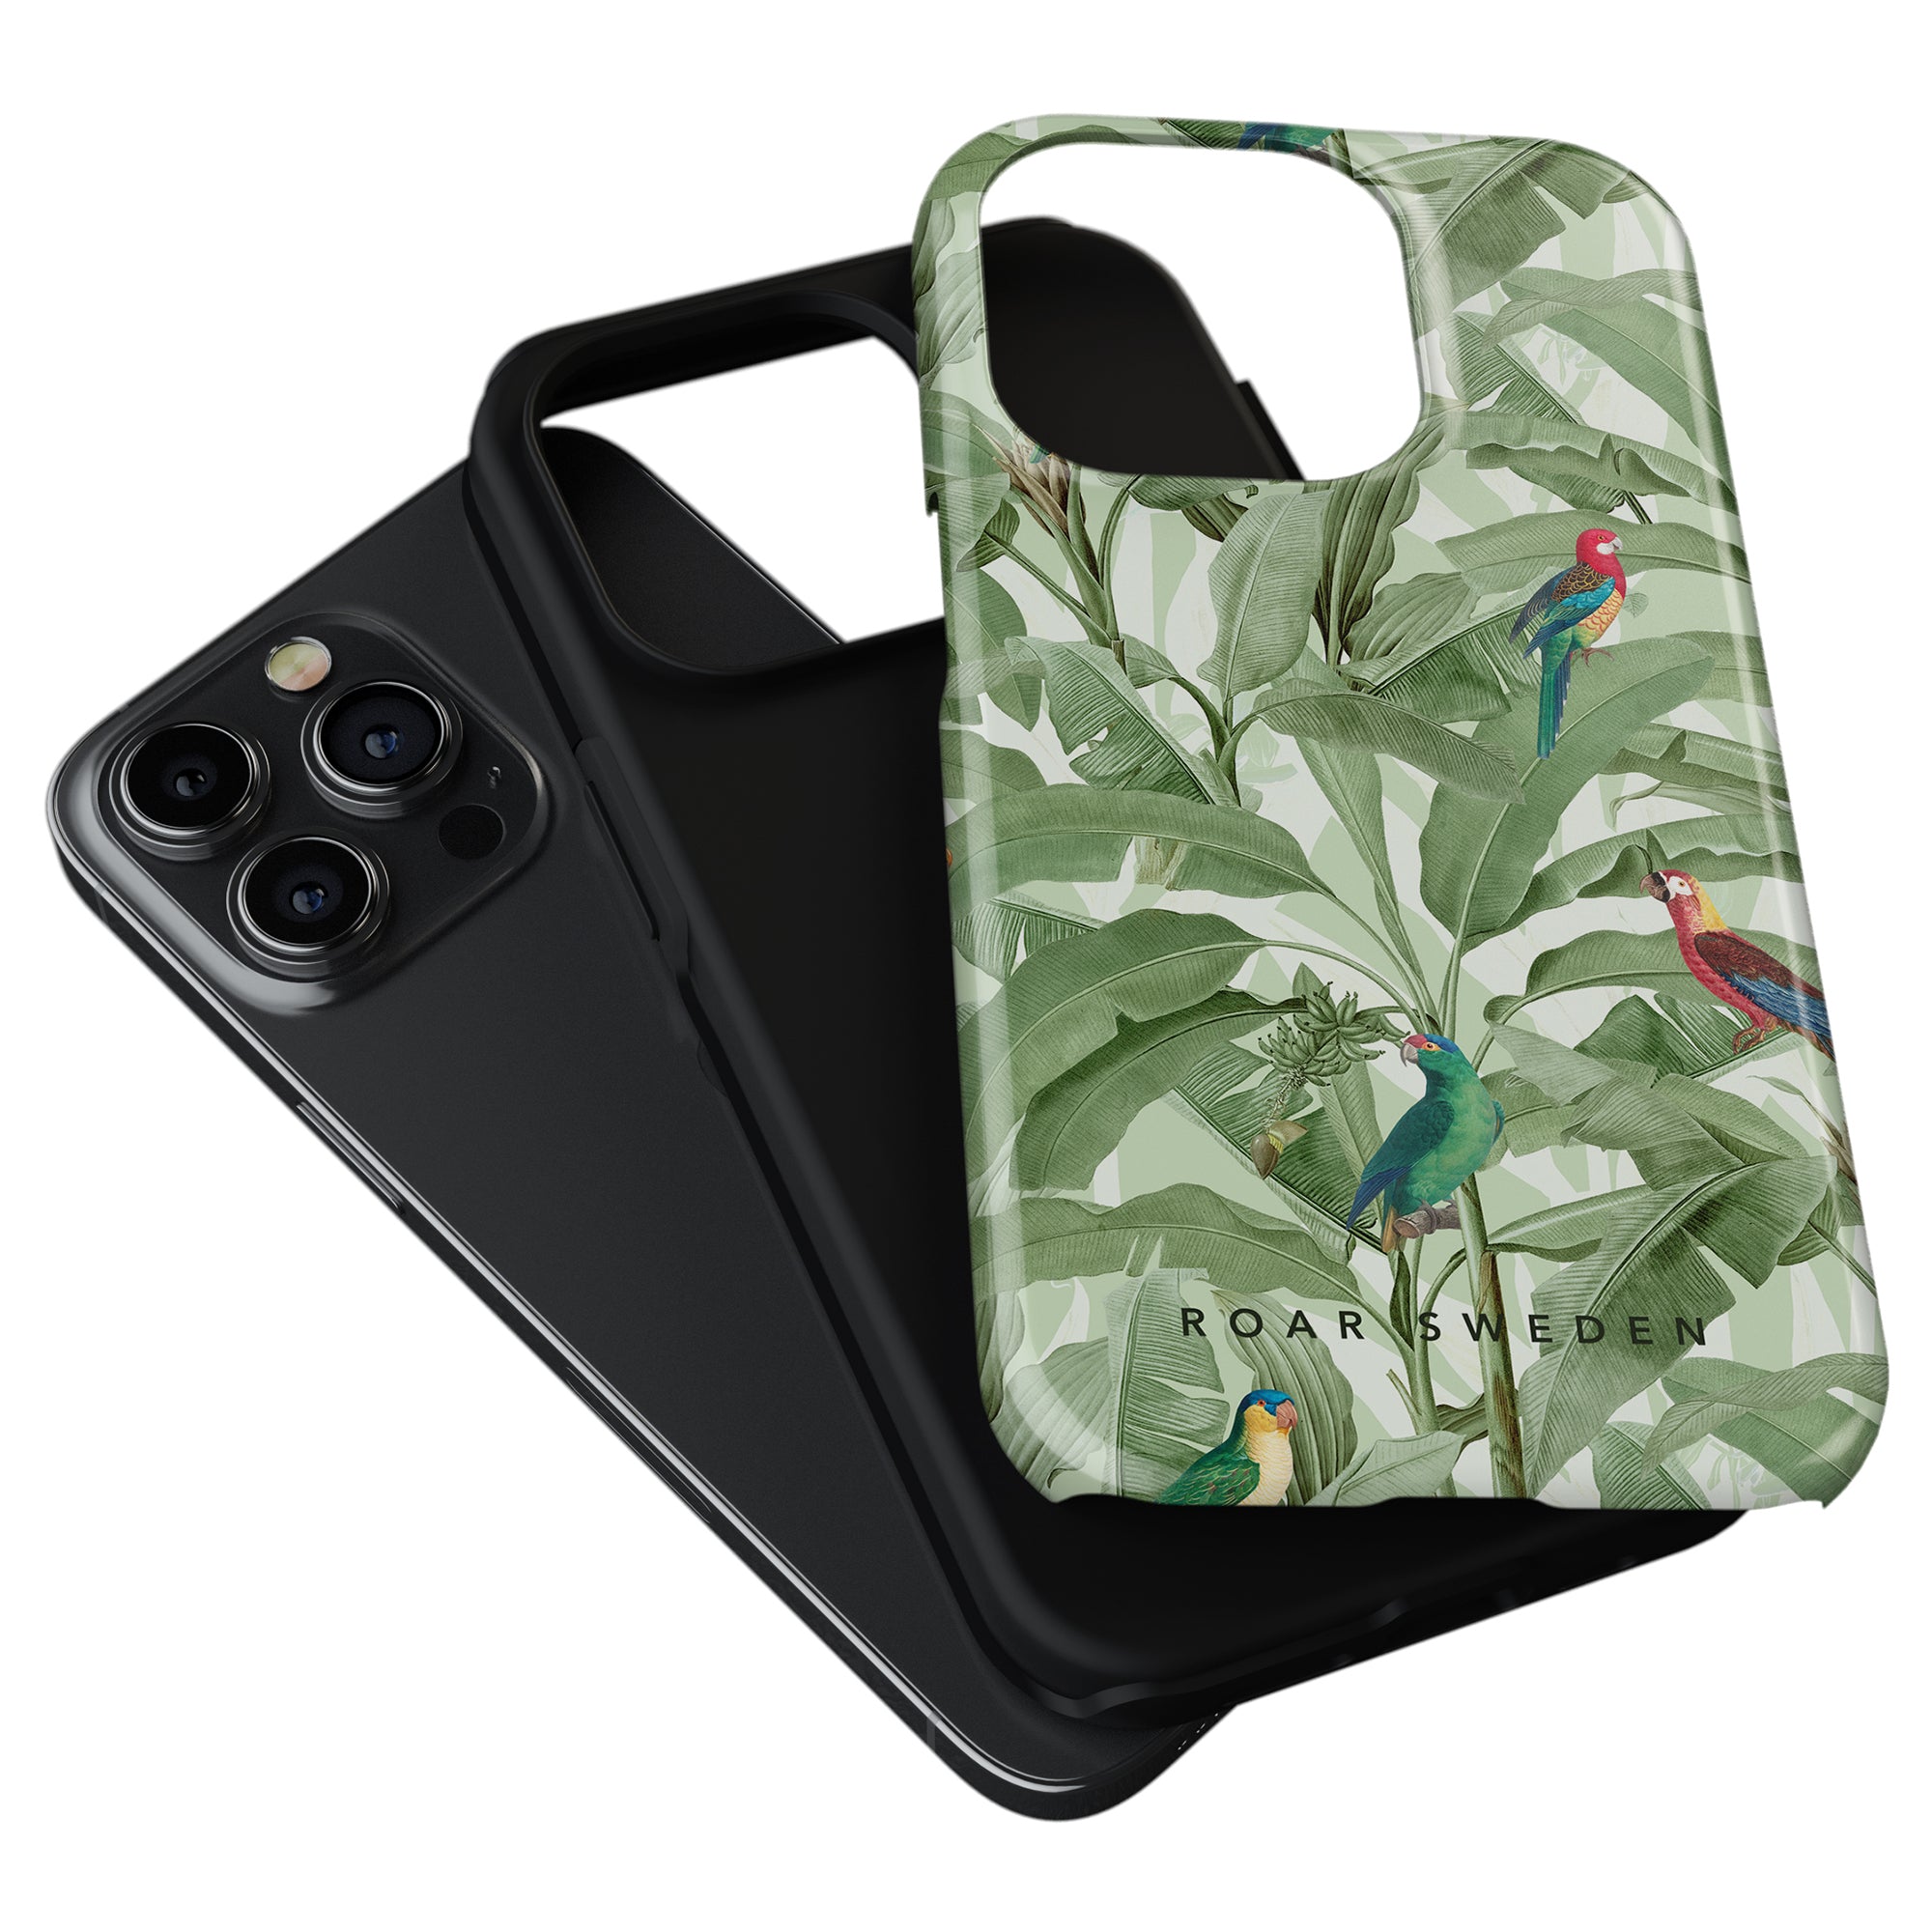 Two smartphone cases, one black and another from the Parrot Paradise - Tough Case, positioned next to each other against a white background.